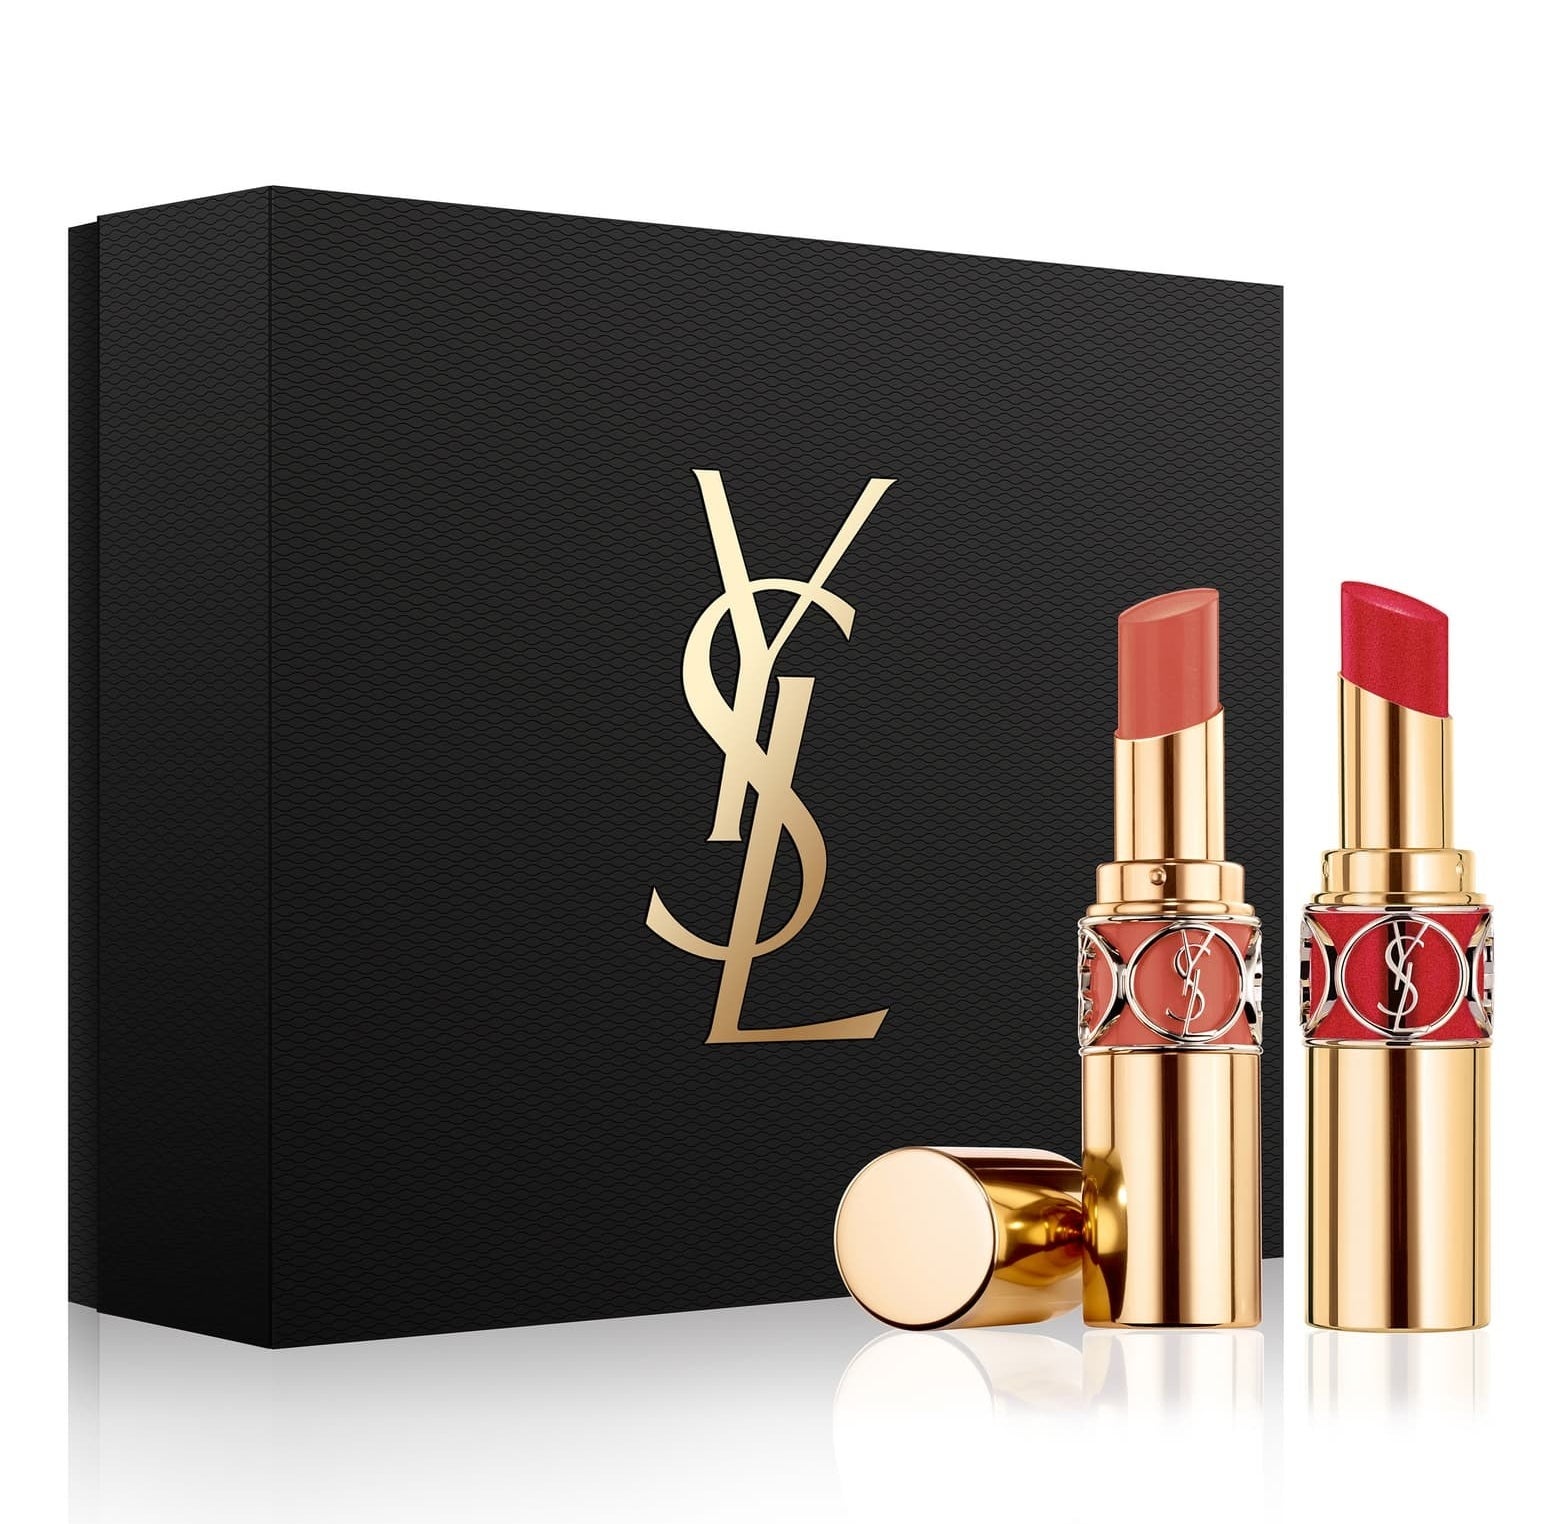 the two YSL lipsticsk in gold tubes with the YSL logo on them